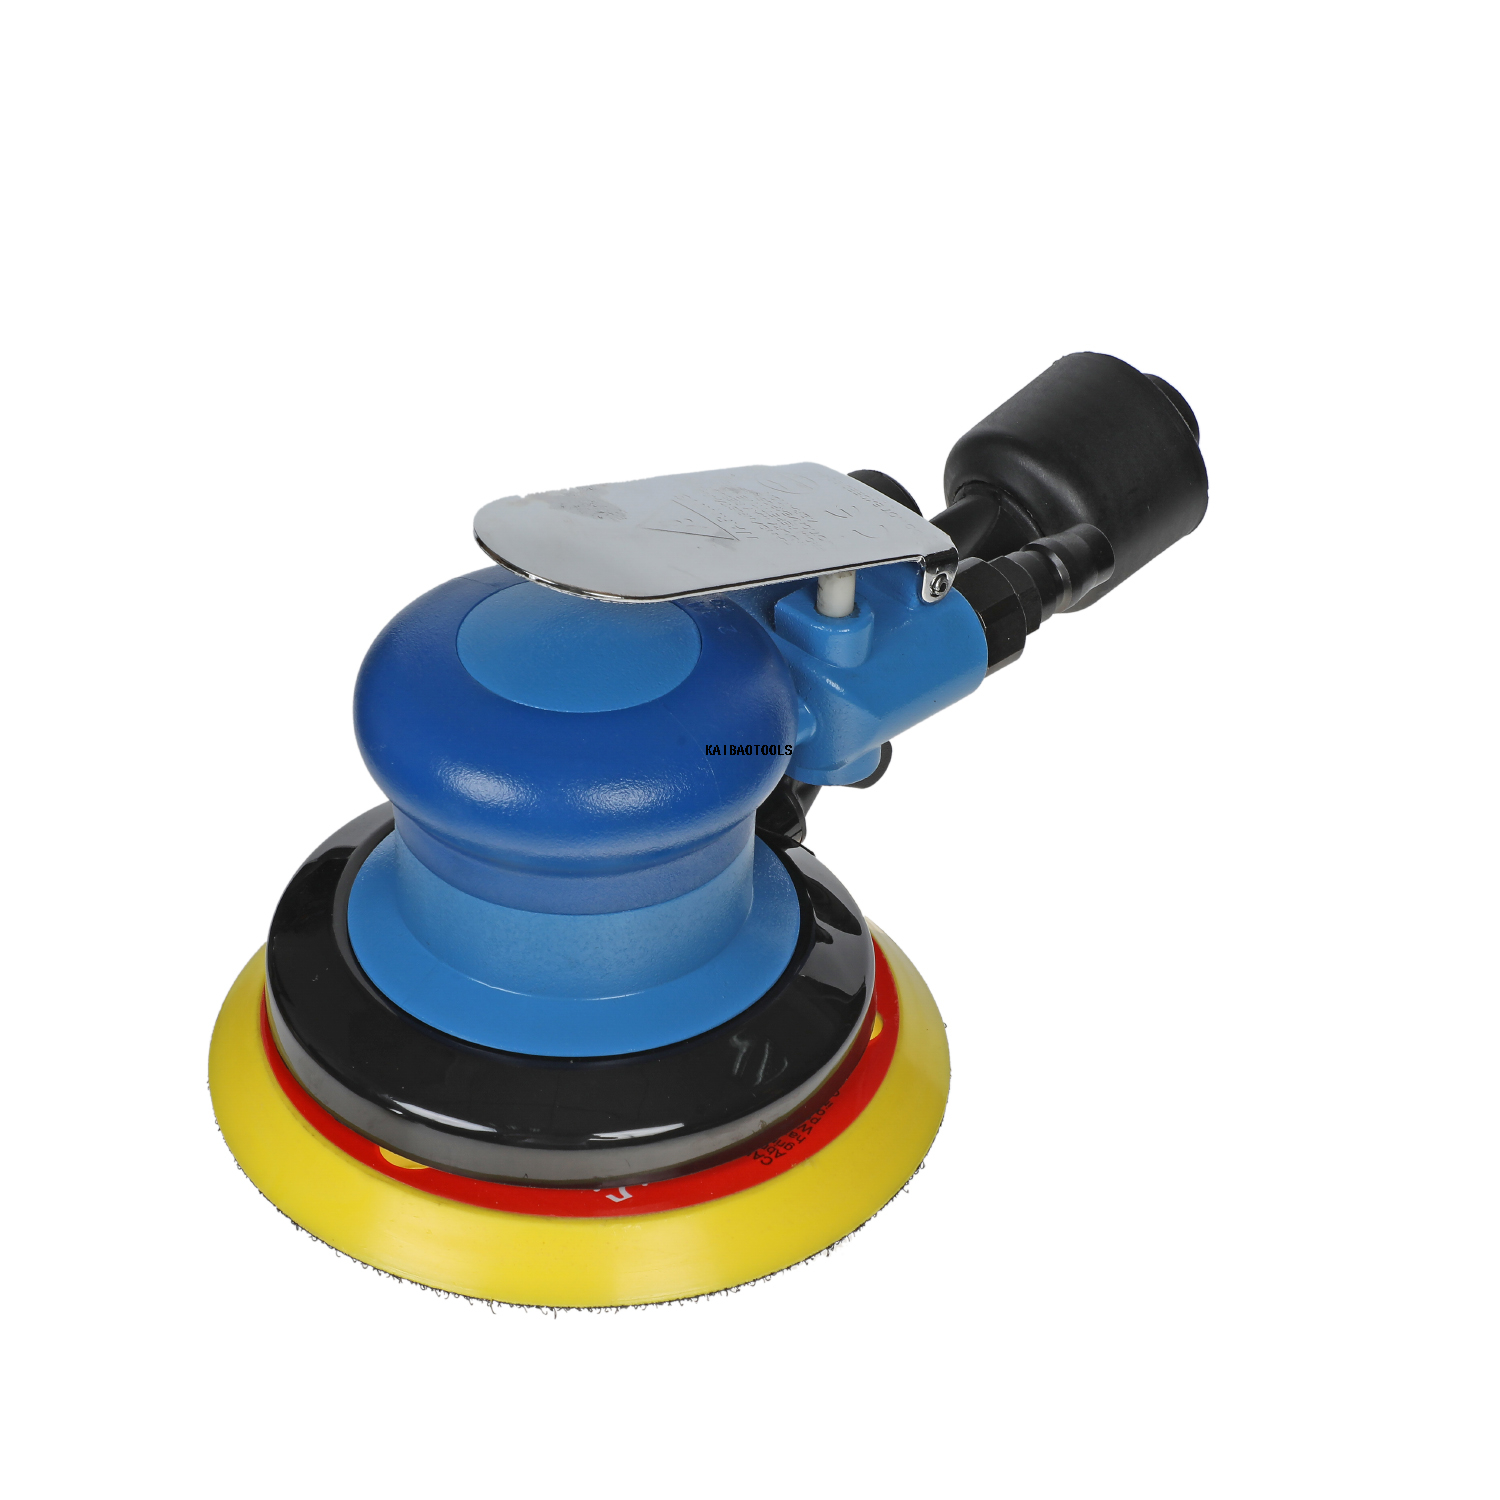 High rotary speed air sander for sanding PS-0026D